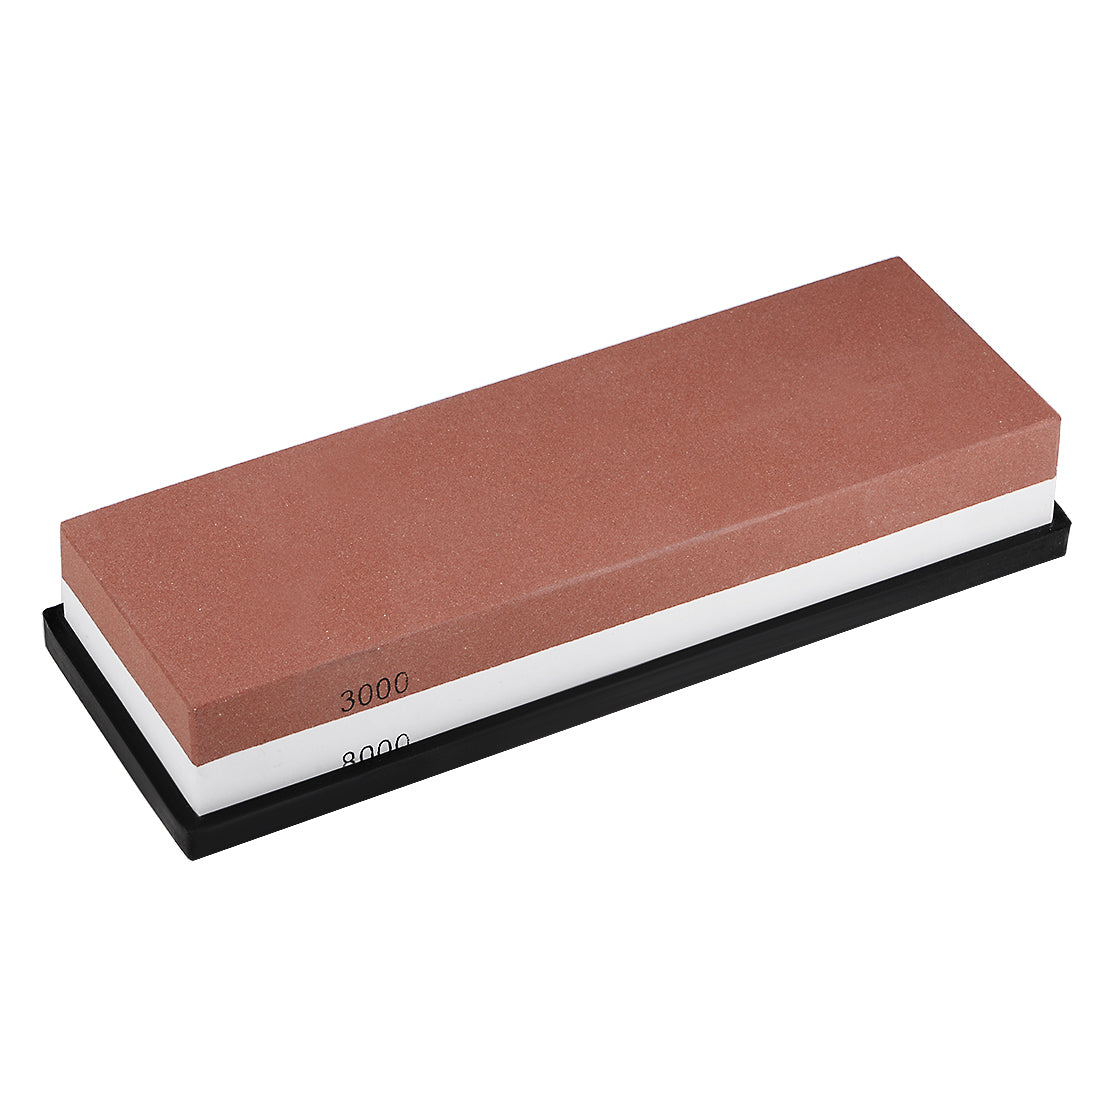 uxcell Uxcell Double-Sided Whetstone Knives Sharpener Sharpening Stone 3000/8000 Grit for Scissors Razors Carving Tool